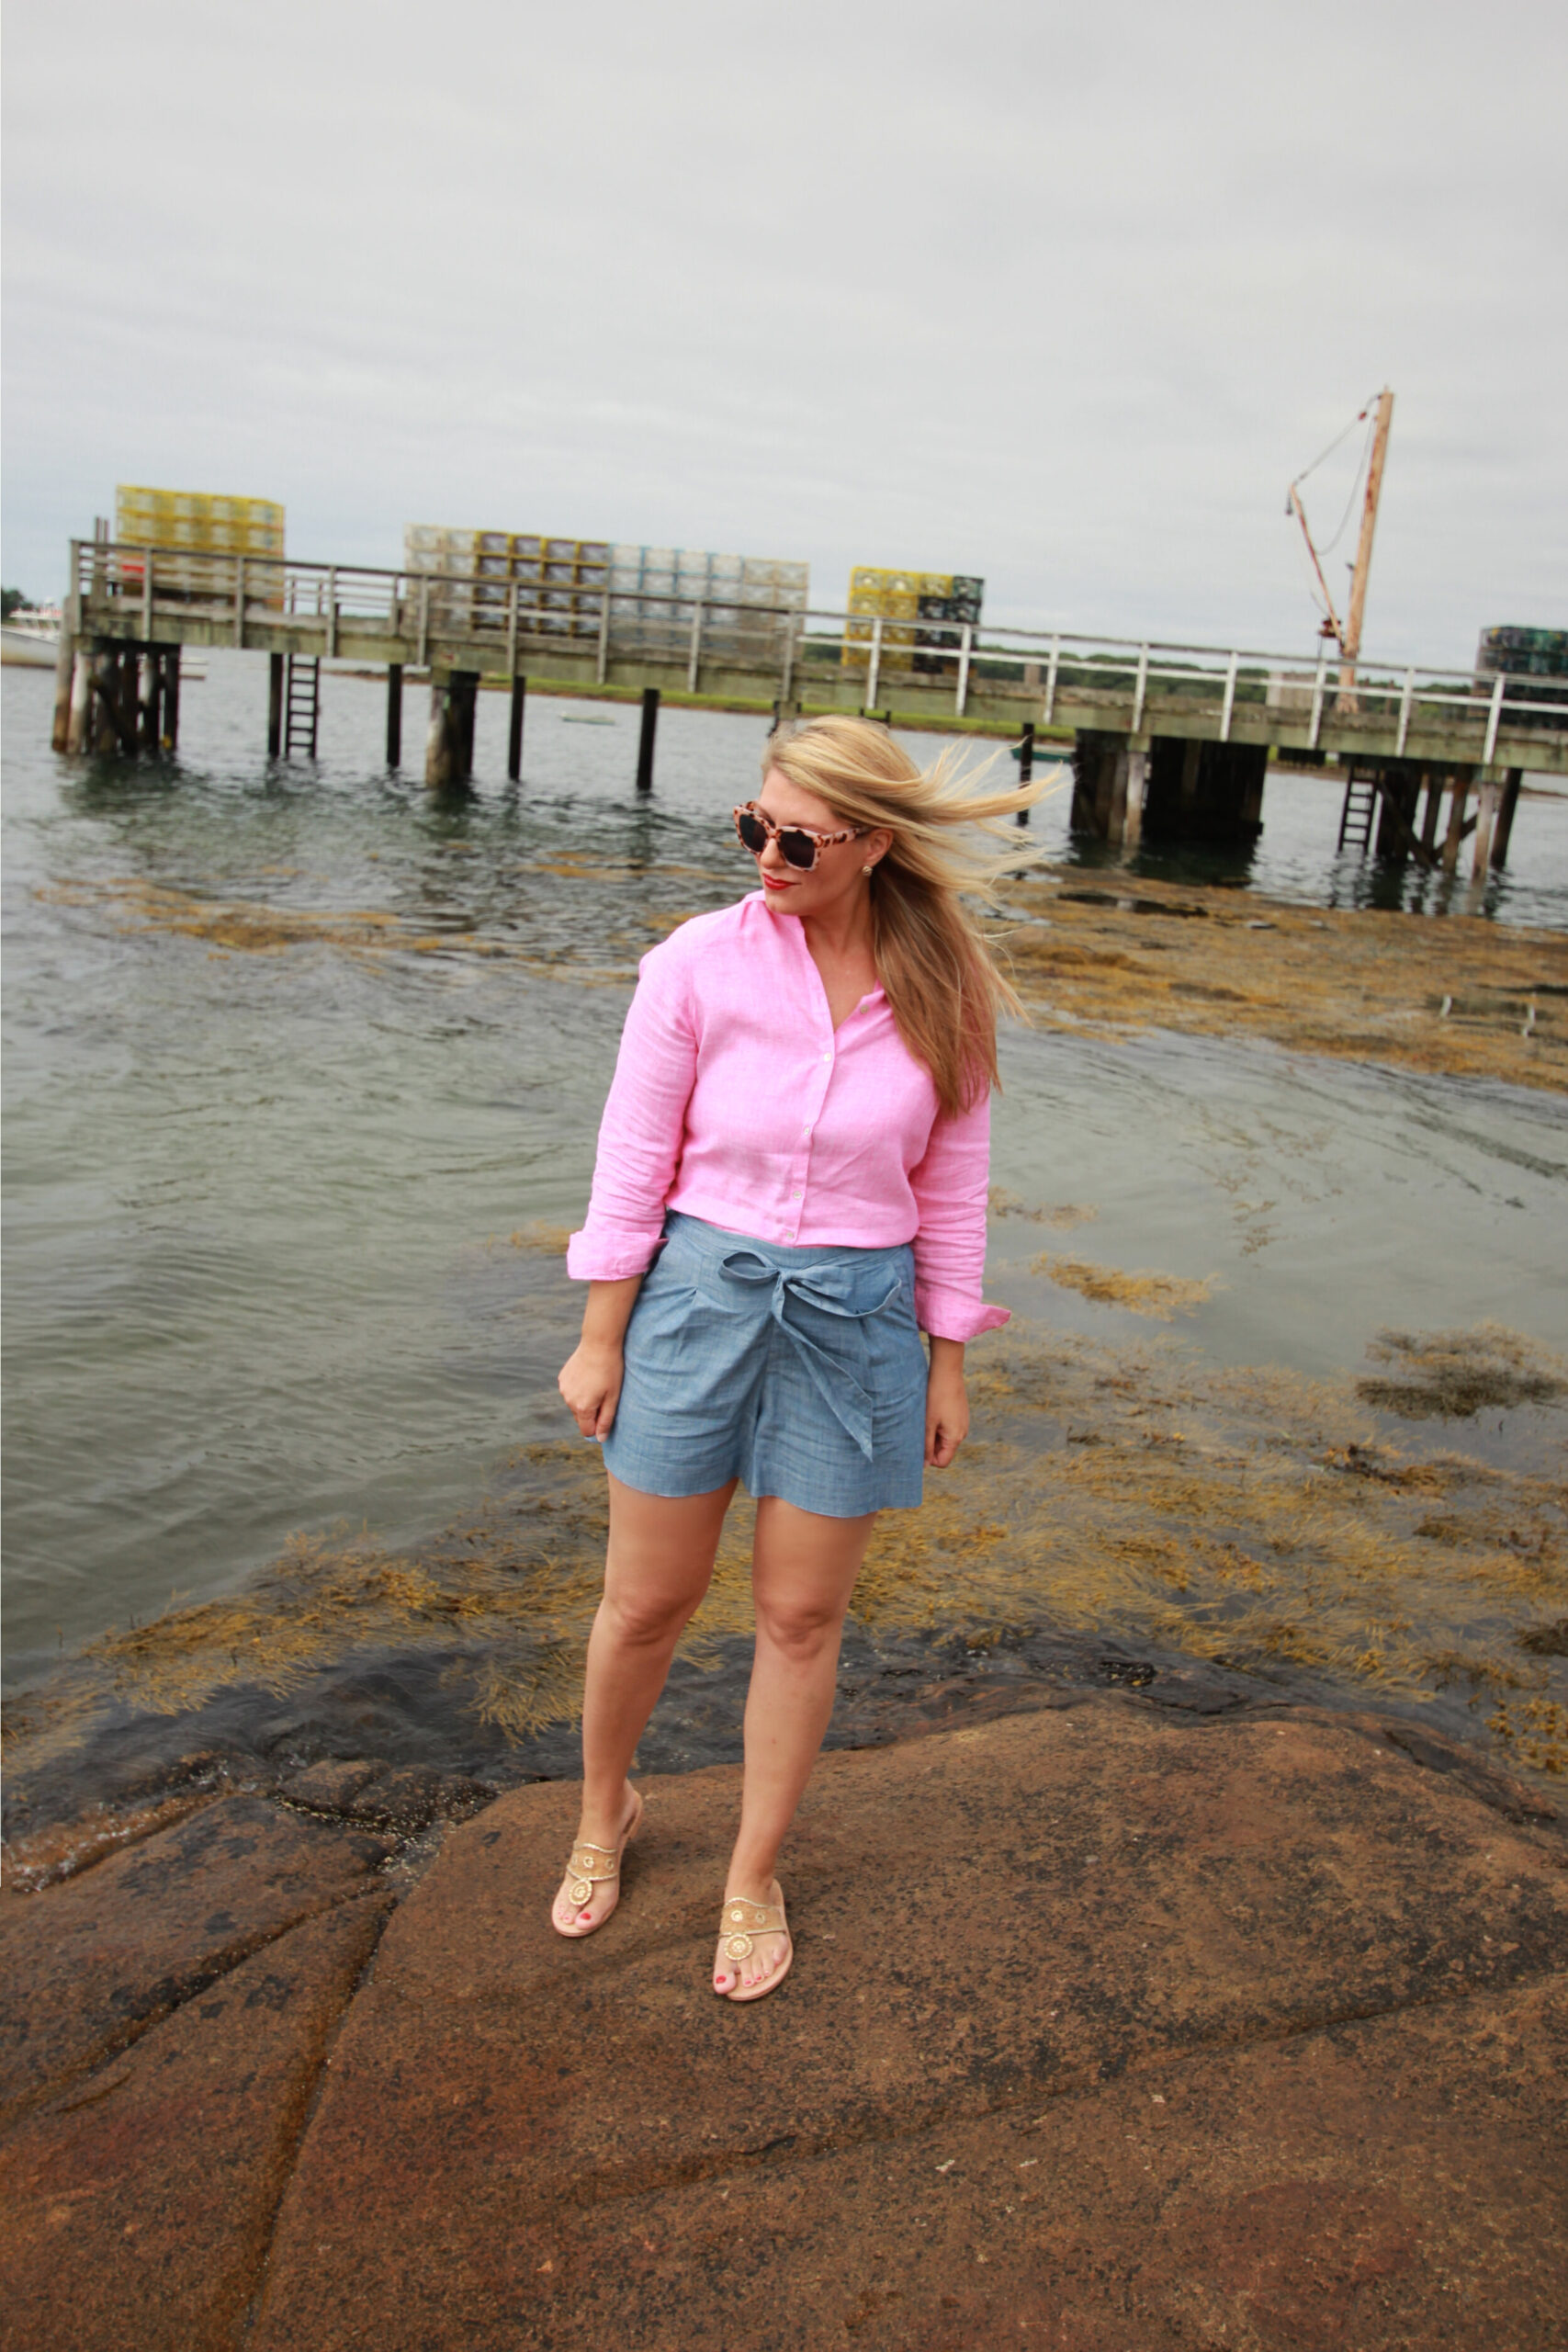 No Iron Linen Shirt c/o FoxcroftI lived in button downs almost every day on vacation because the weather was a bit of everything. We had cool days, rainy days, hot and humid sunny days—a great mix. This Foxcroft pink linen top was a great option bec…